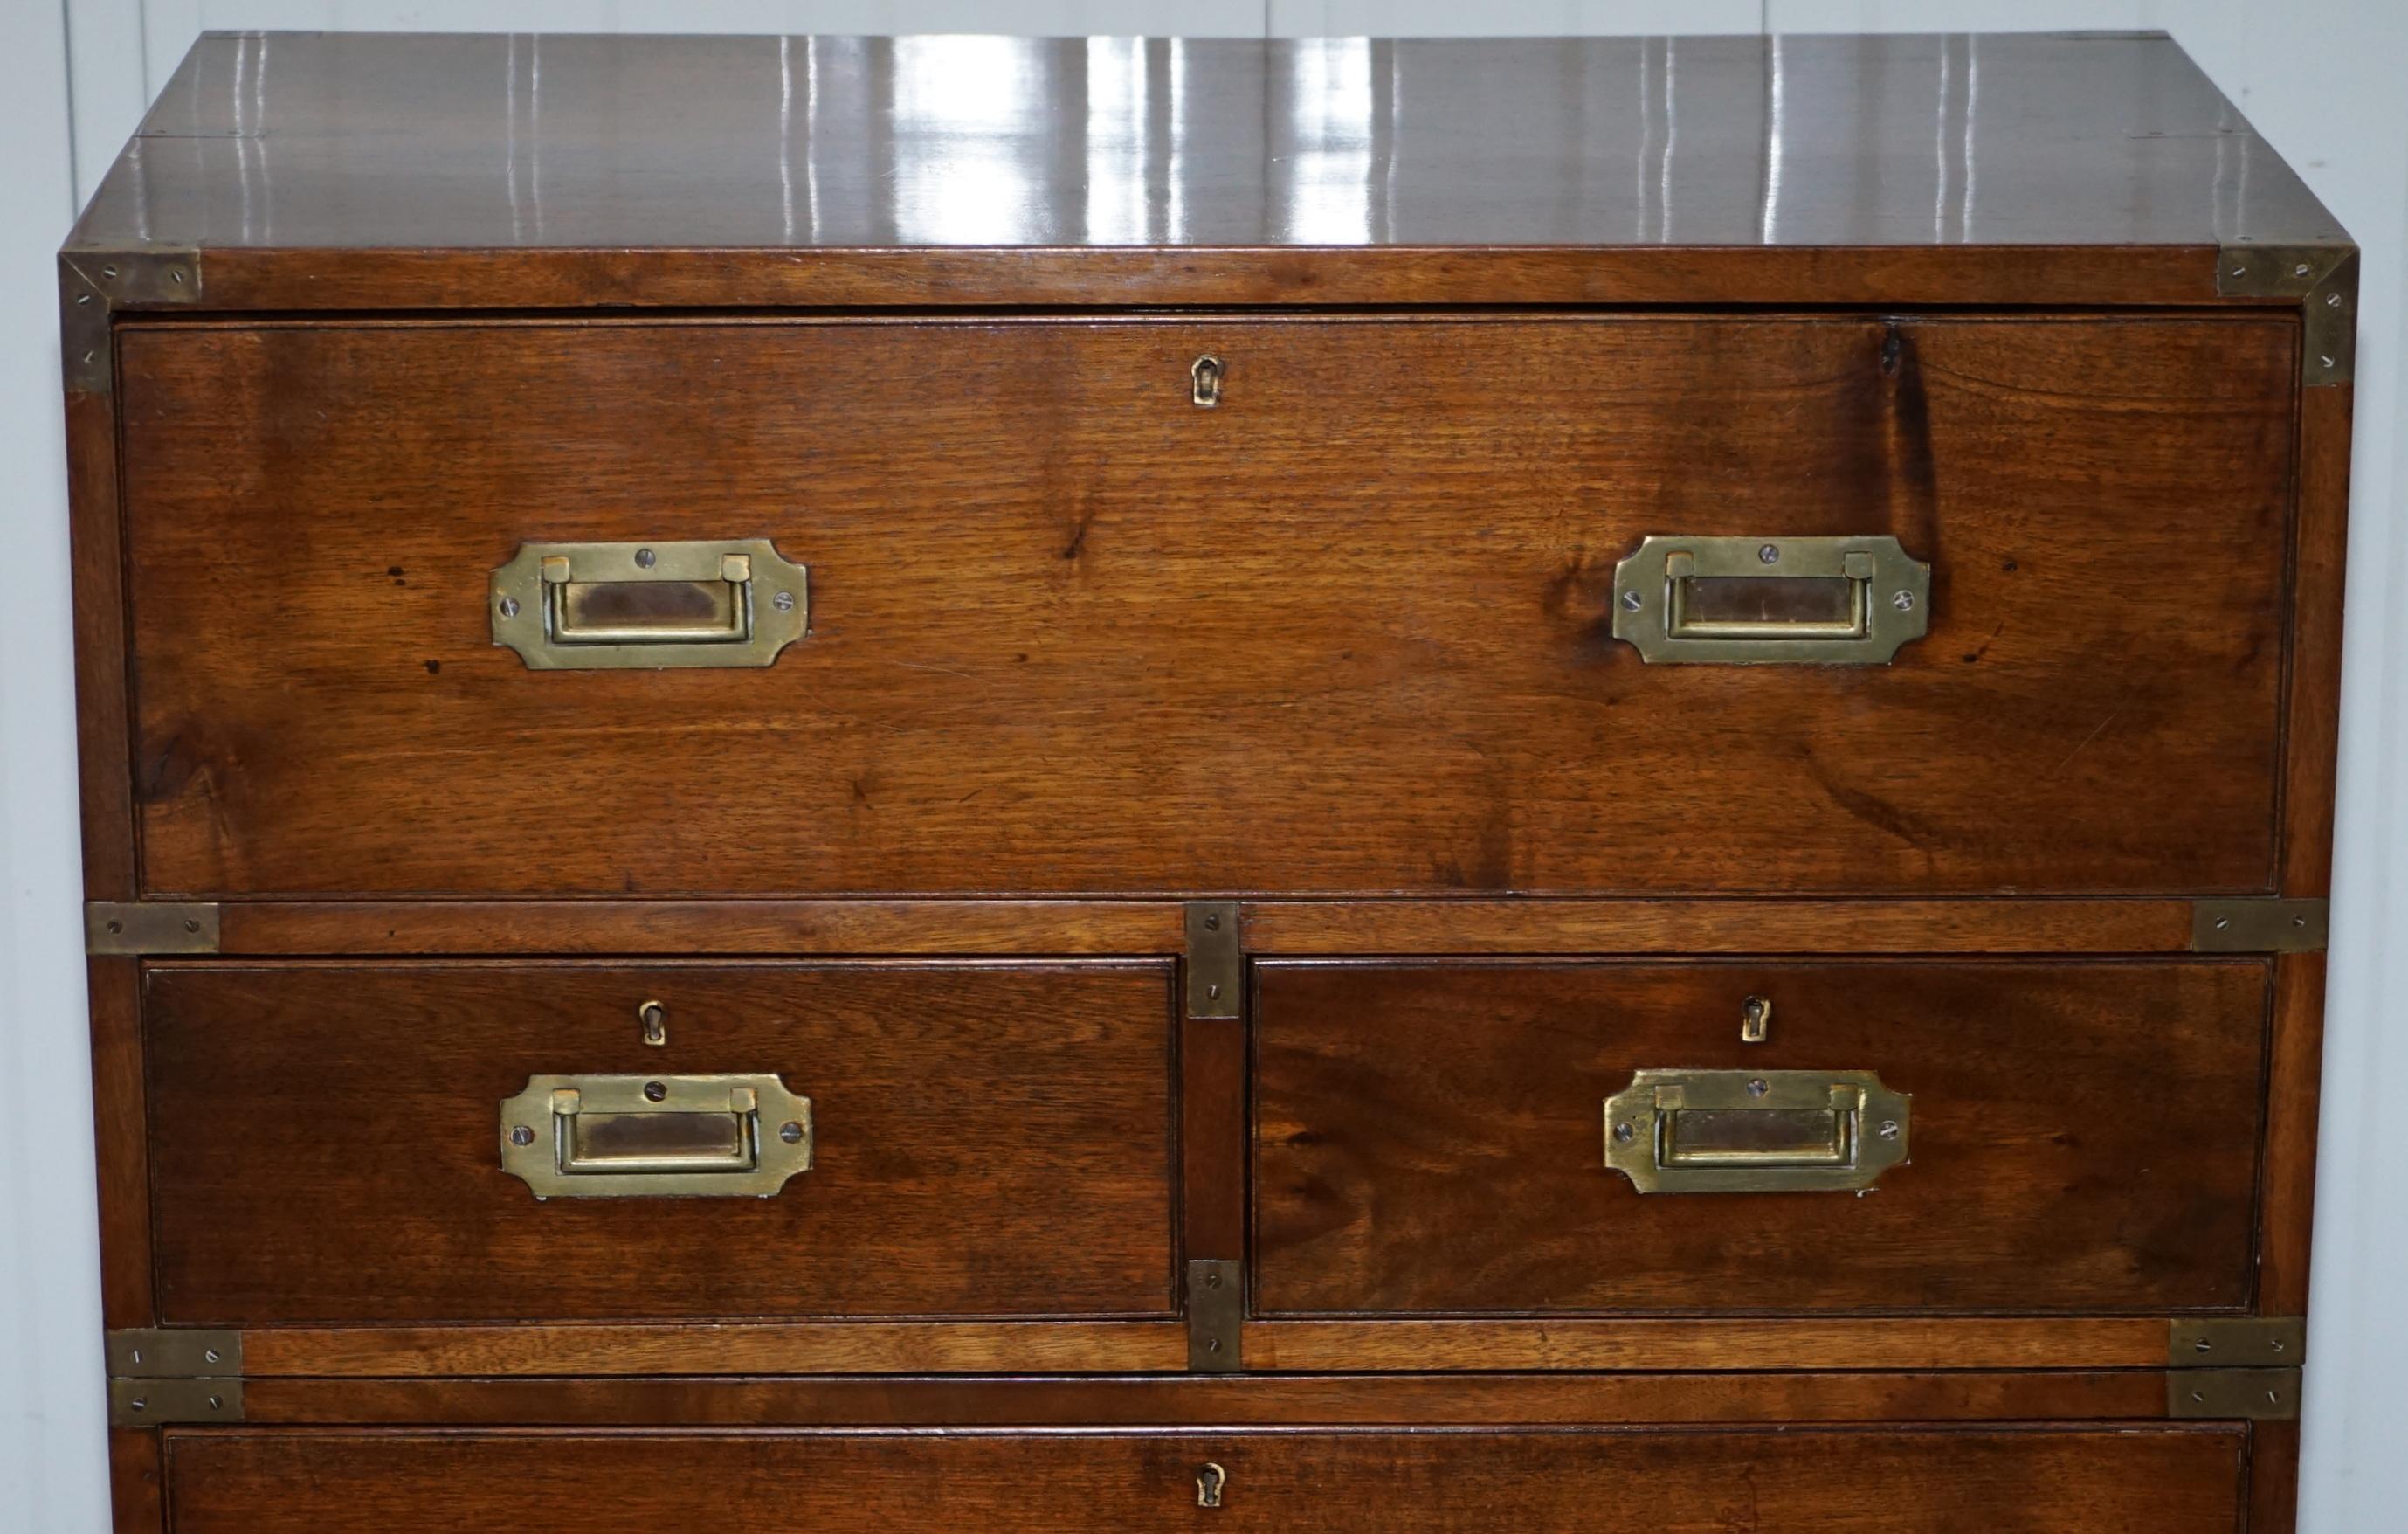 Victorian Military Campaign Chest of Drawers Built in Secrataire Drop Front Desk (Mahagoni)